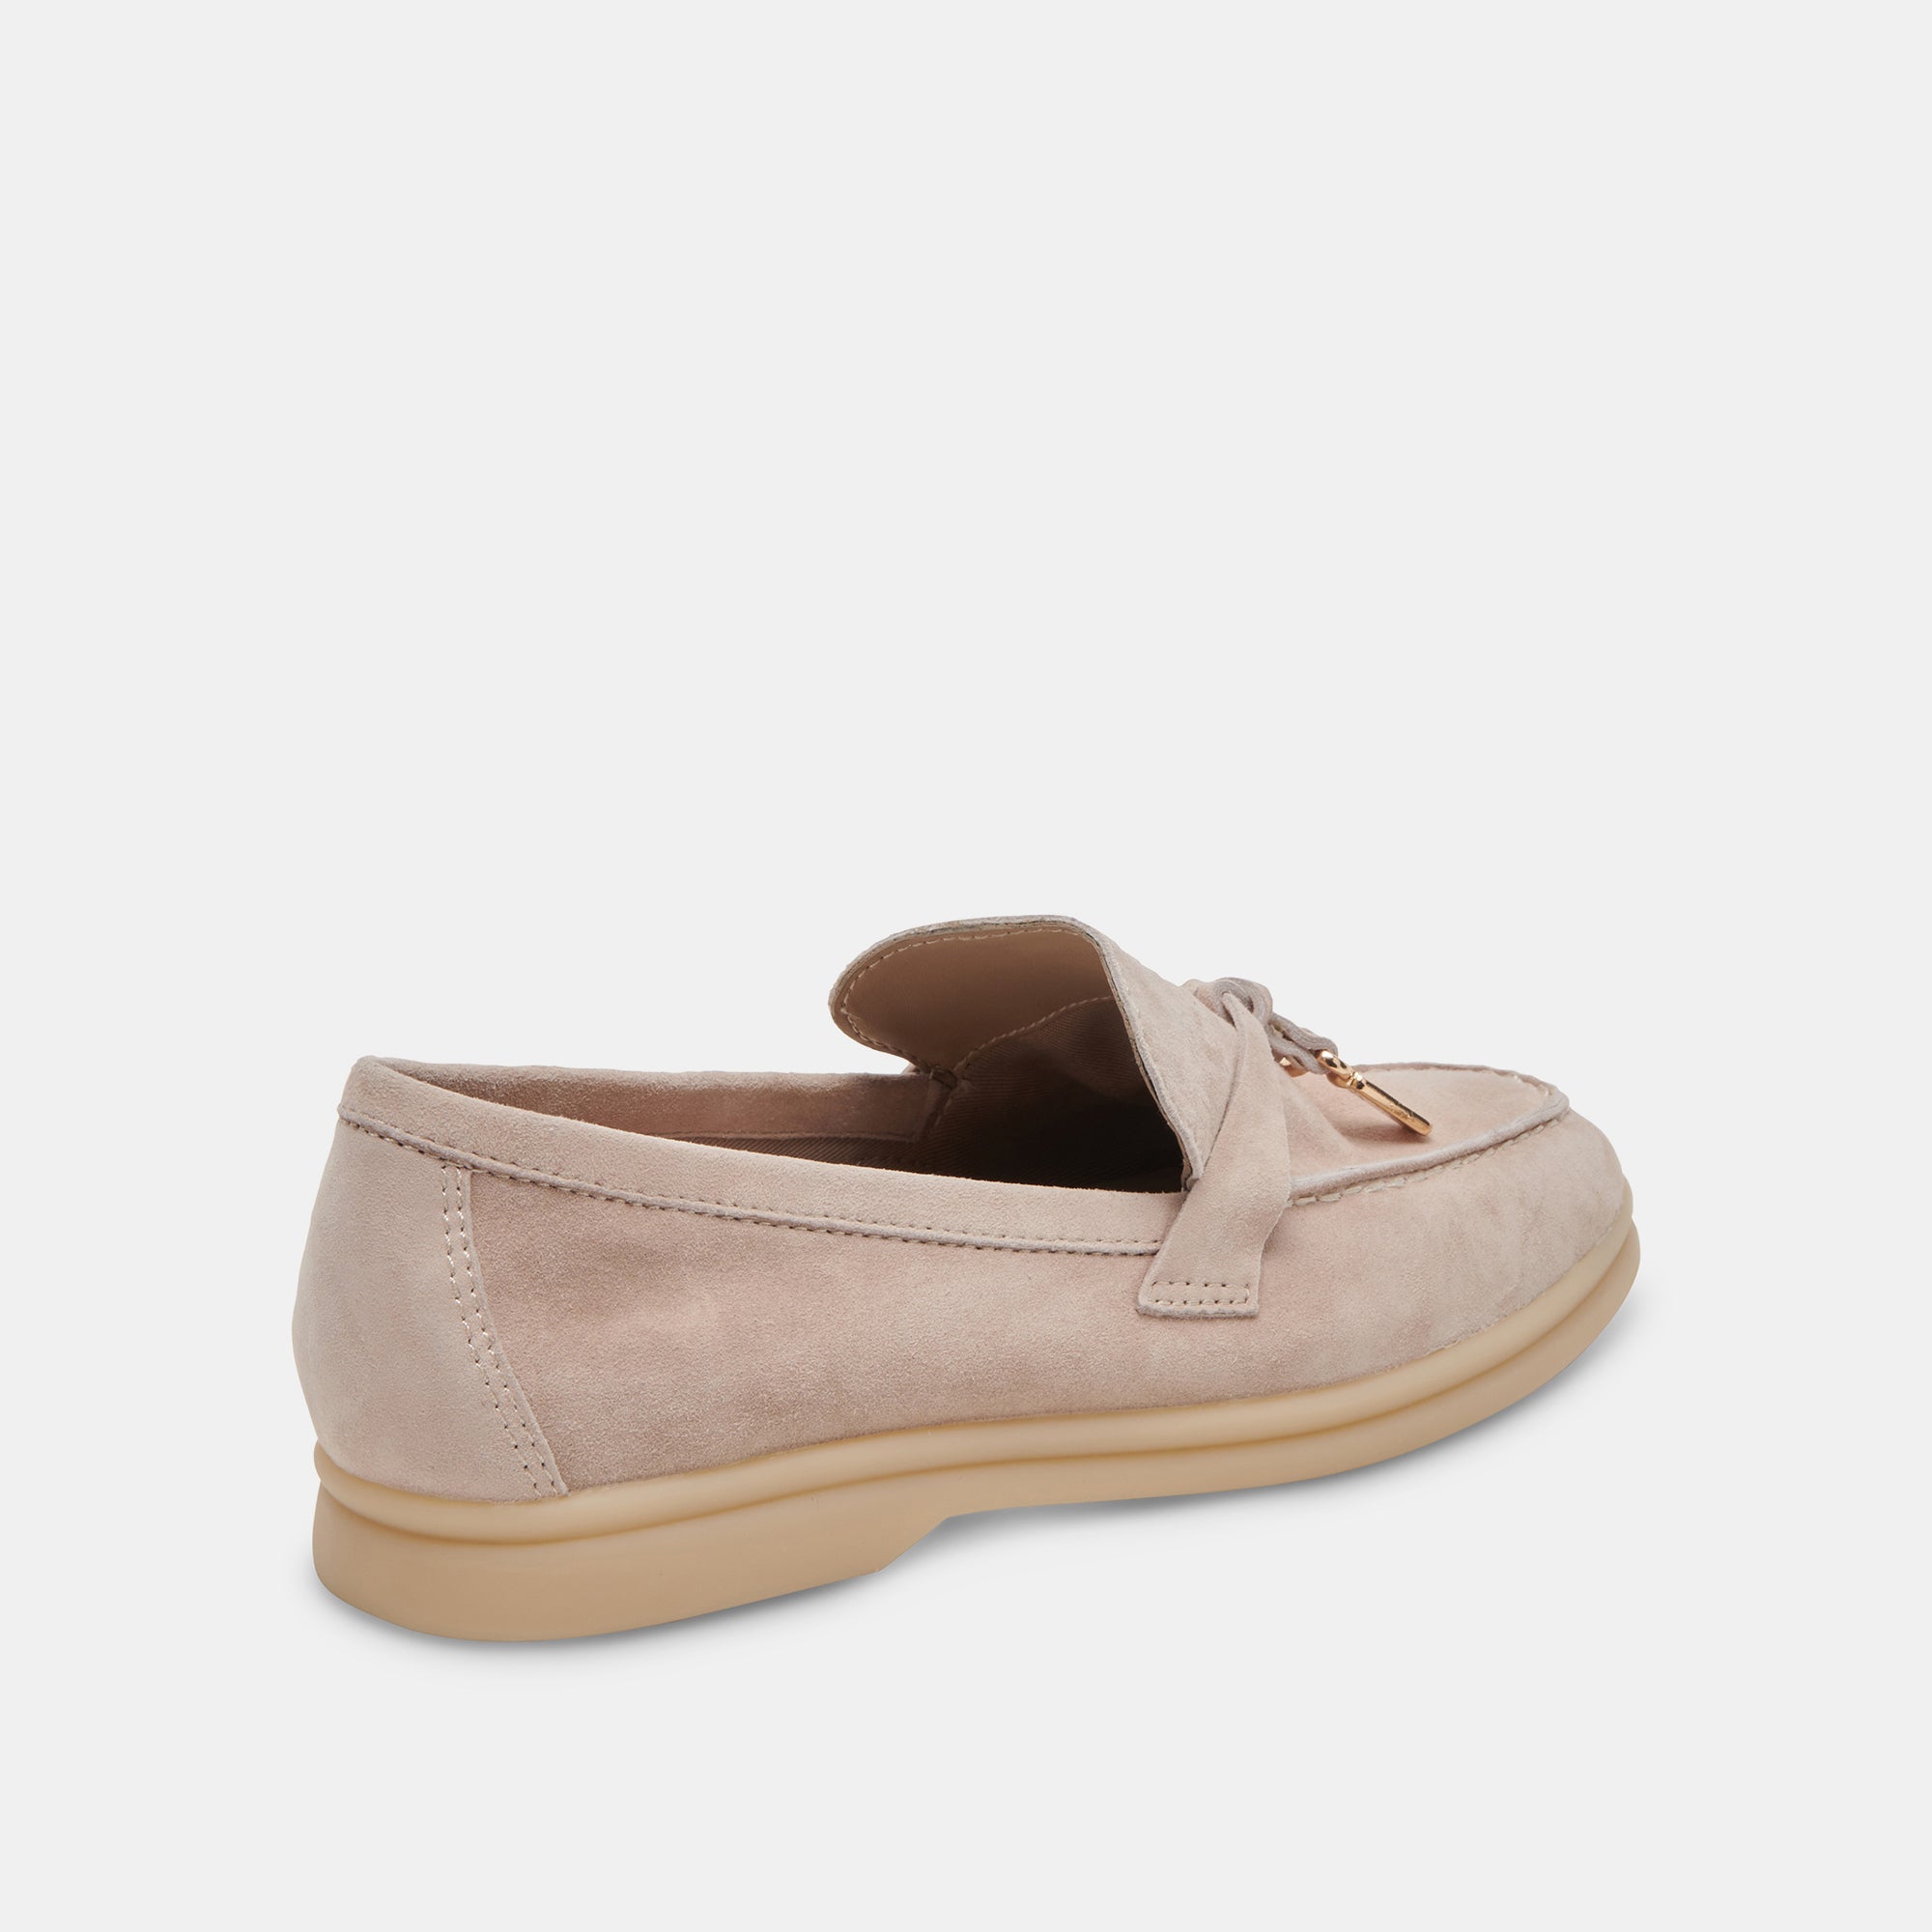 LONZO FLATS TAUPE SUEDE – Dolce Vita